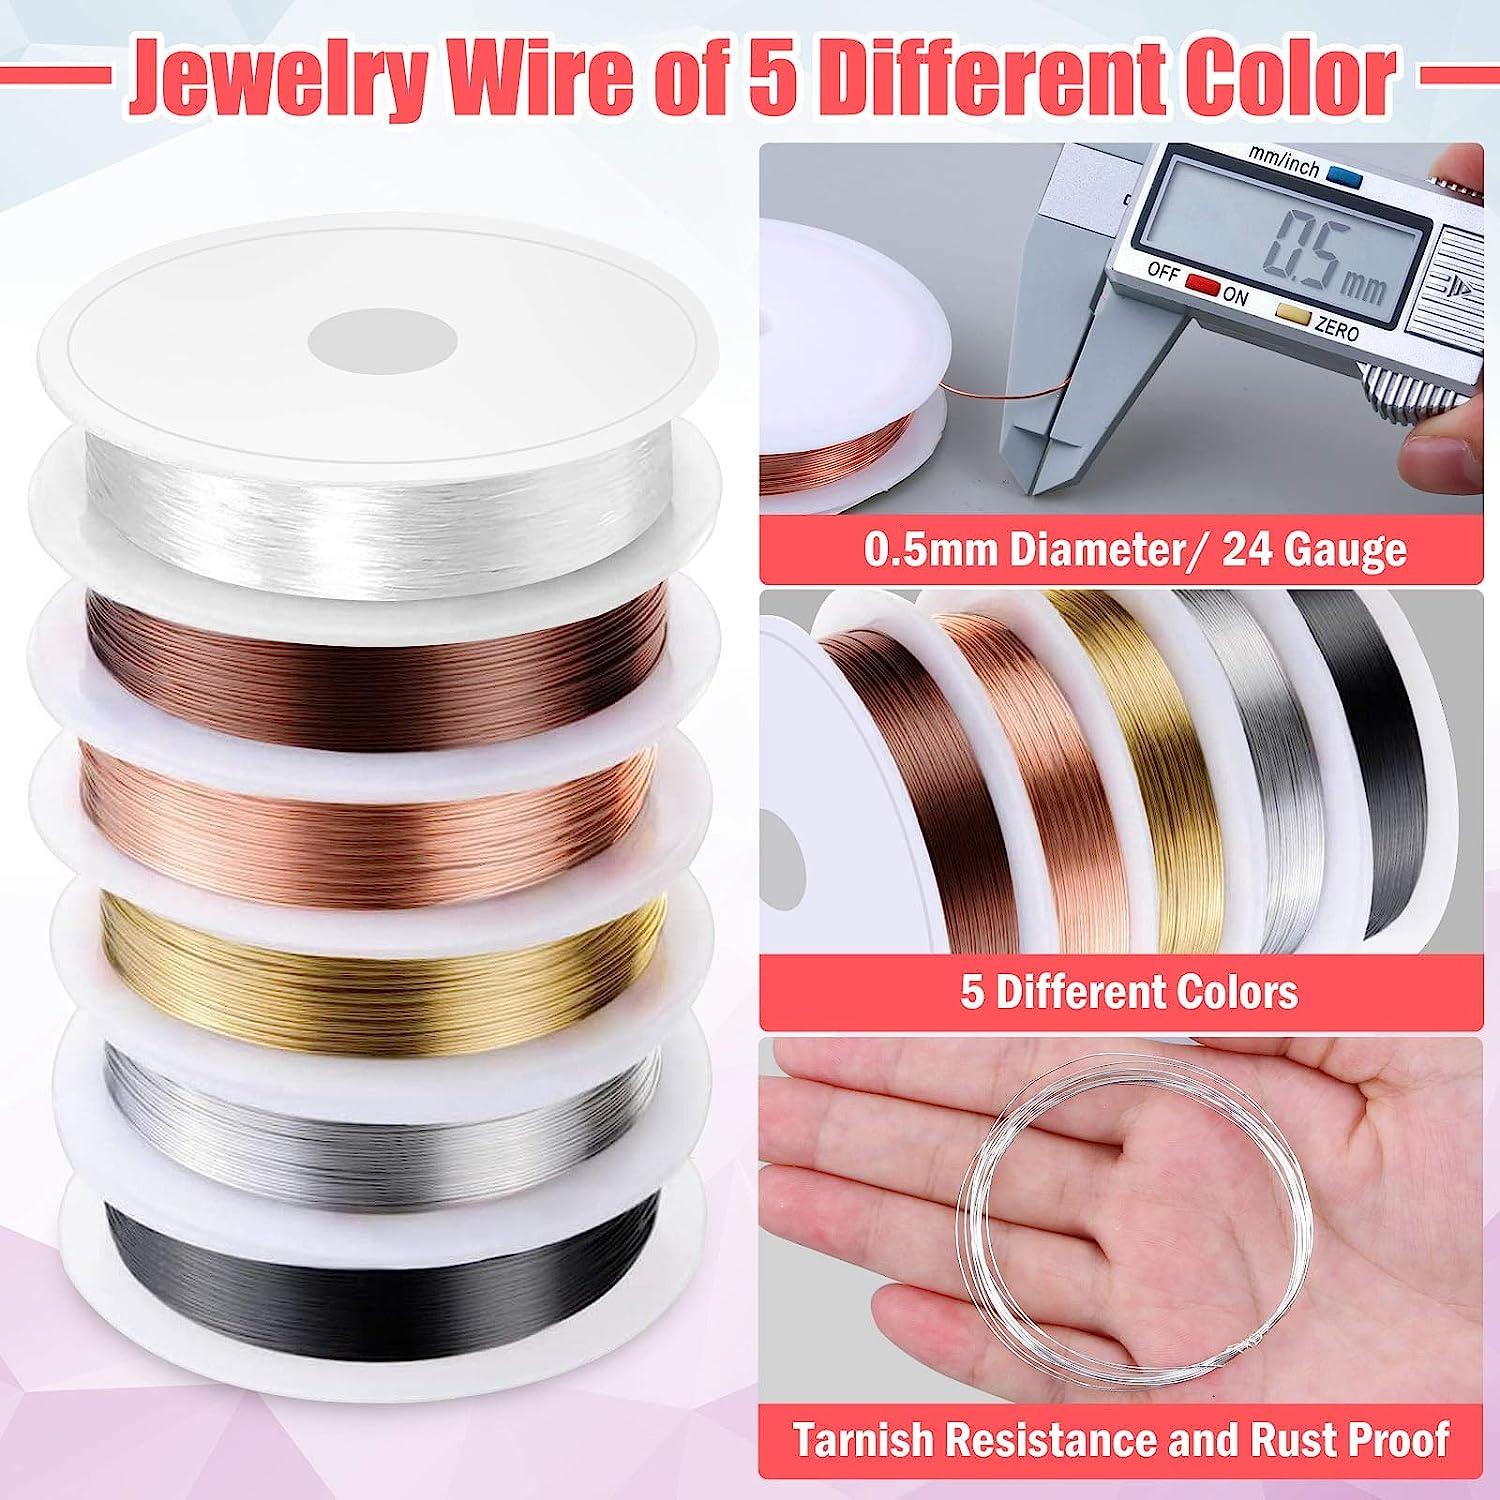 Jewelry Wire Wrapping Jewelry Making Supplies Kit, Ring Sizer